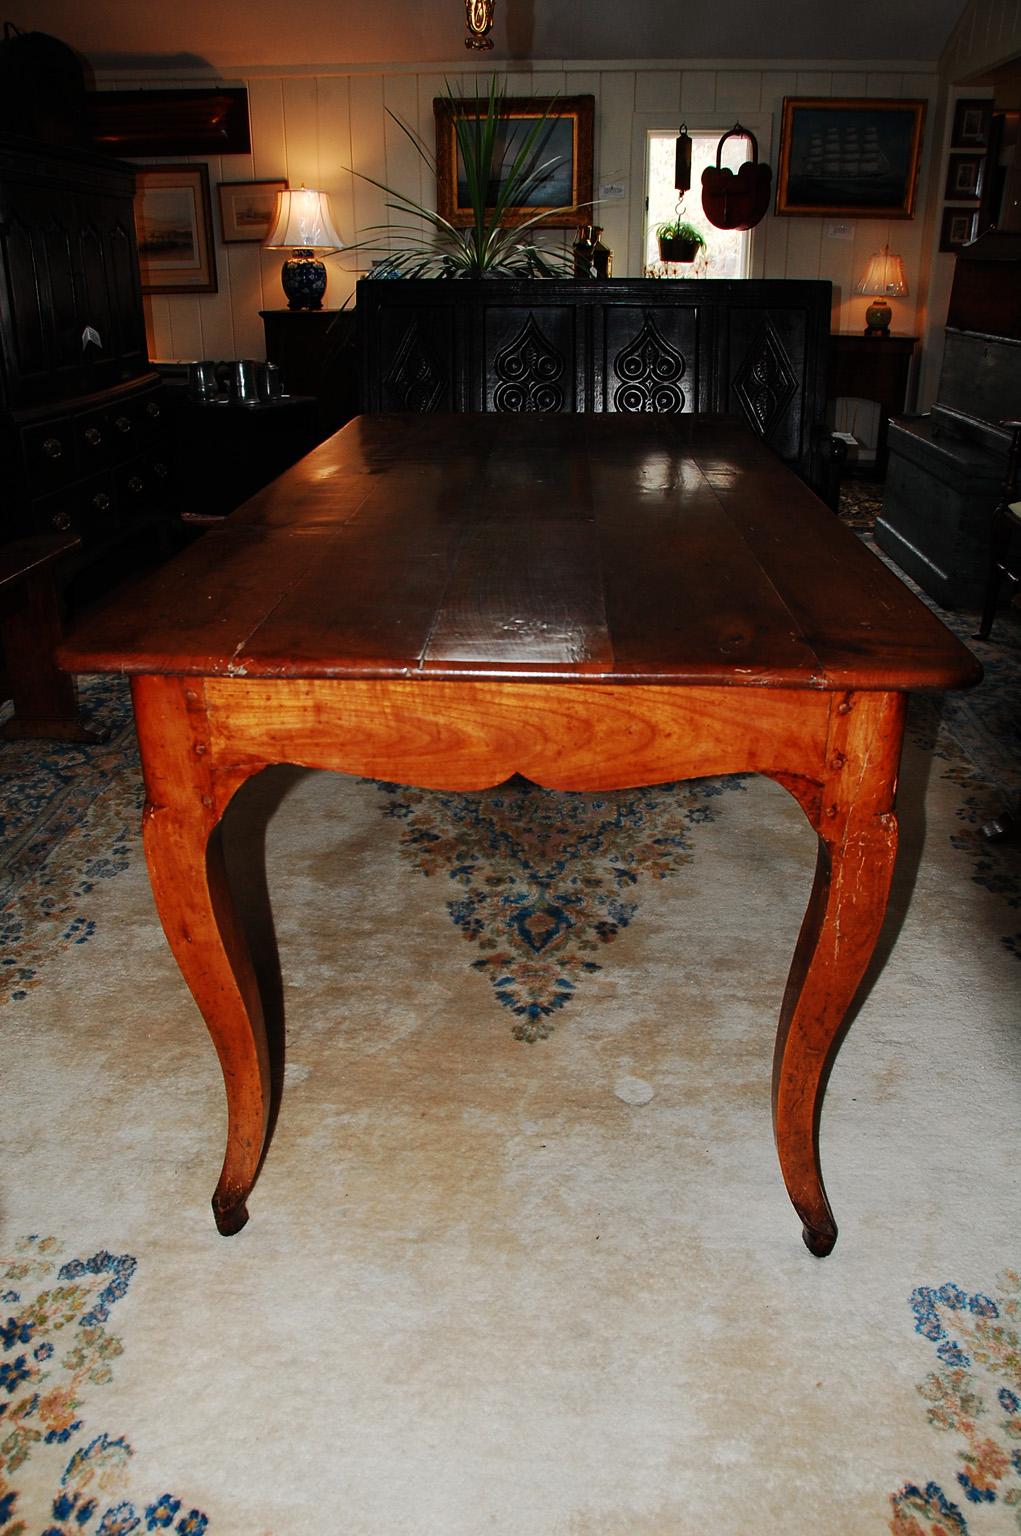 French provincial cherry farmhouse table with graceful cabriole legs, single end drawer, shaped skirt all around. This early 19th century table was crafted using the time honored mortise, tenon and peg method of construction. We have modified the